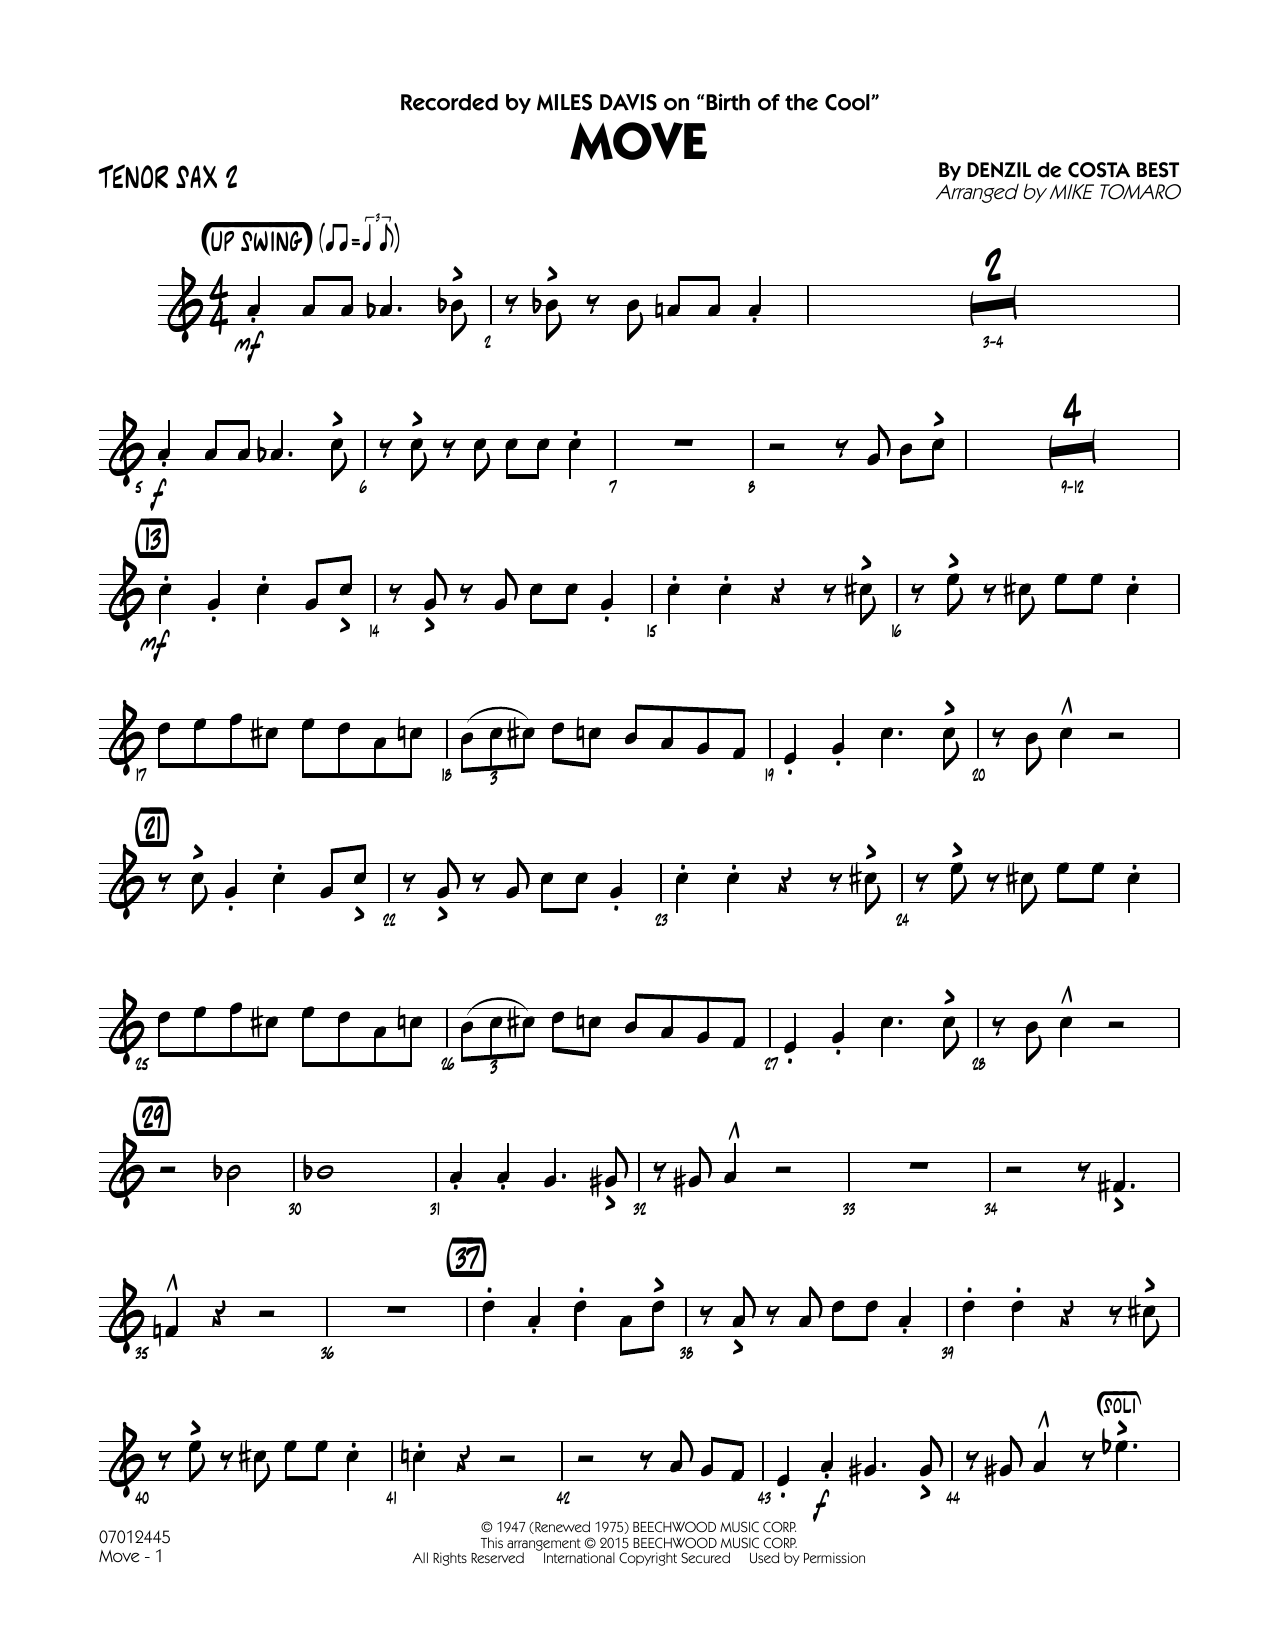 Mike Tomaro Move - Tenor Sax 2 sheet music notes and chords. Download Printable PDF.